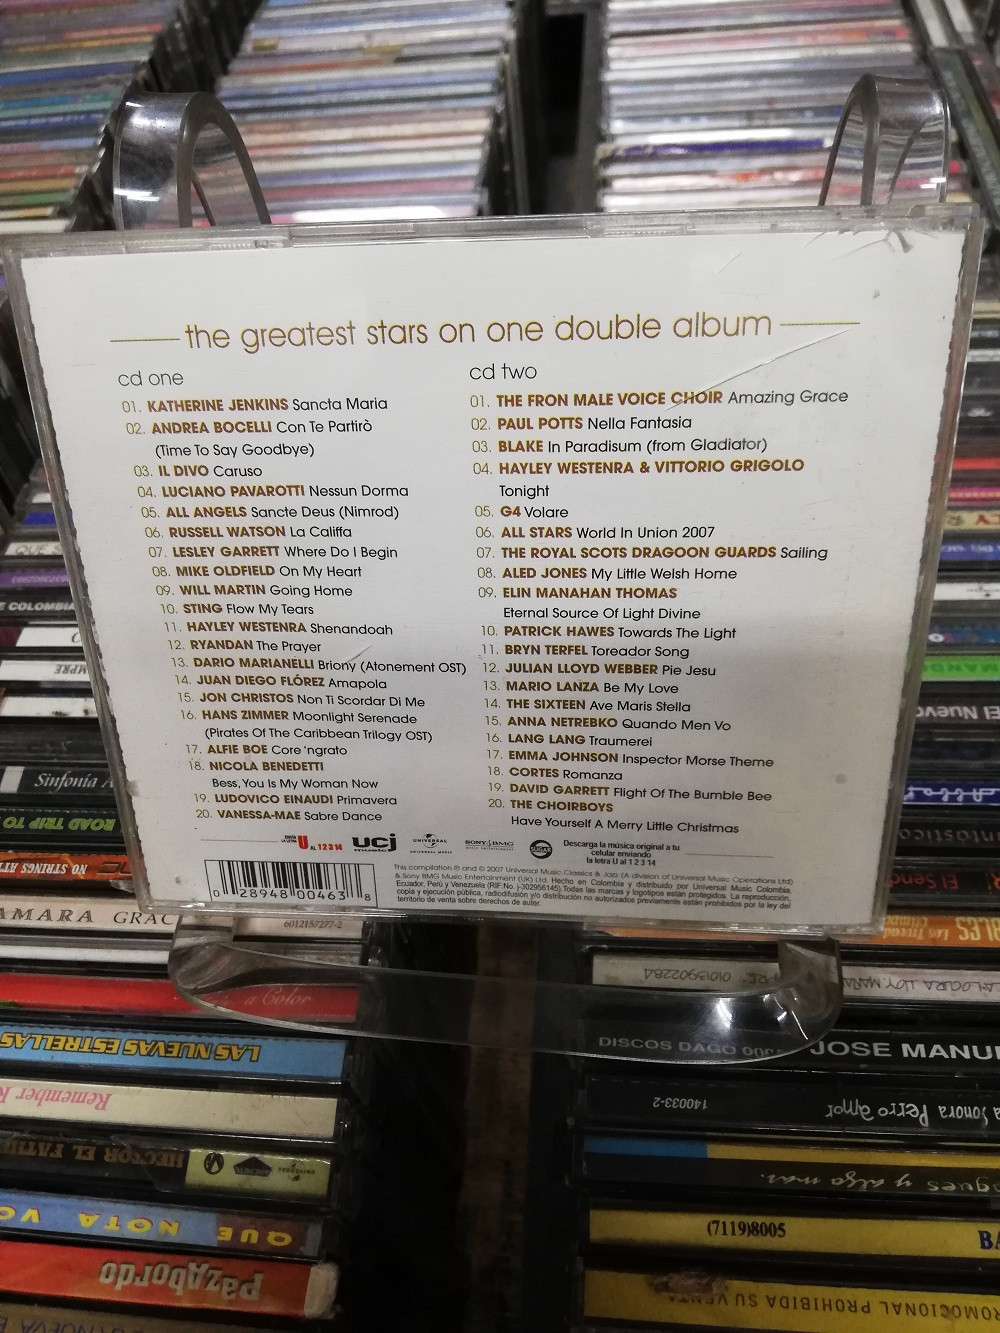 Imagen CD DOBLE THE NUMBER ONE CLASSICAL ALBUM 2008. 2